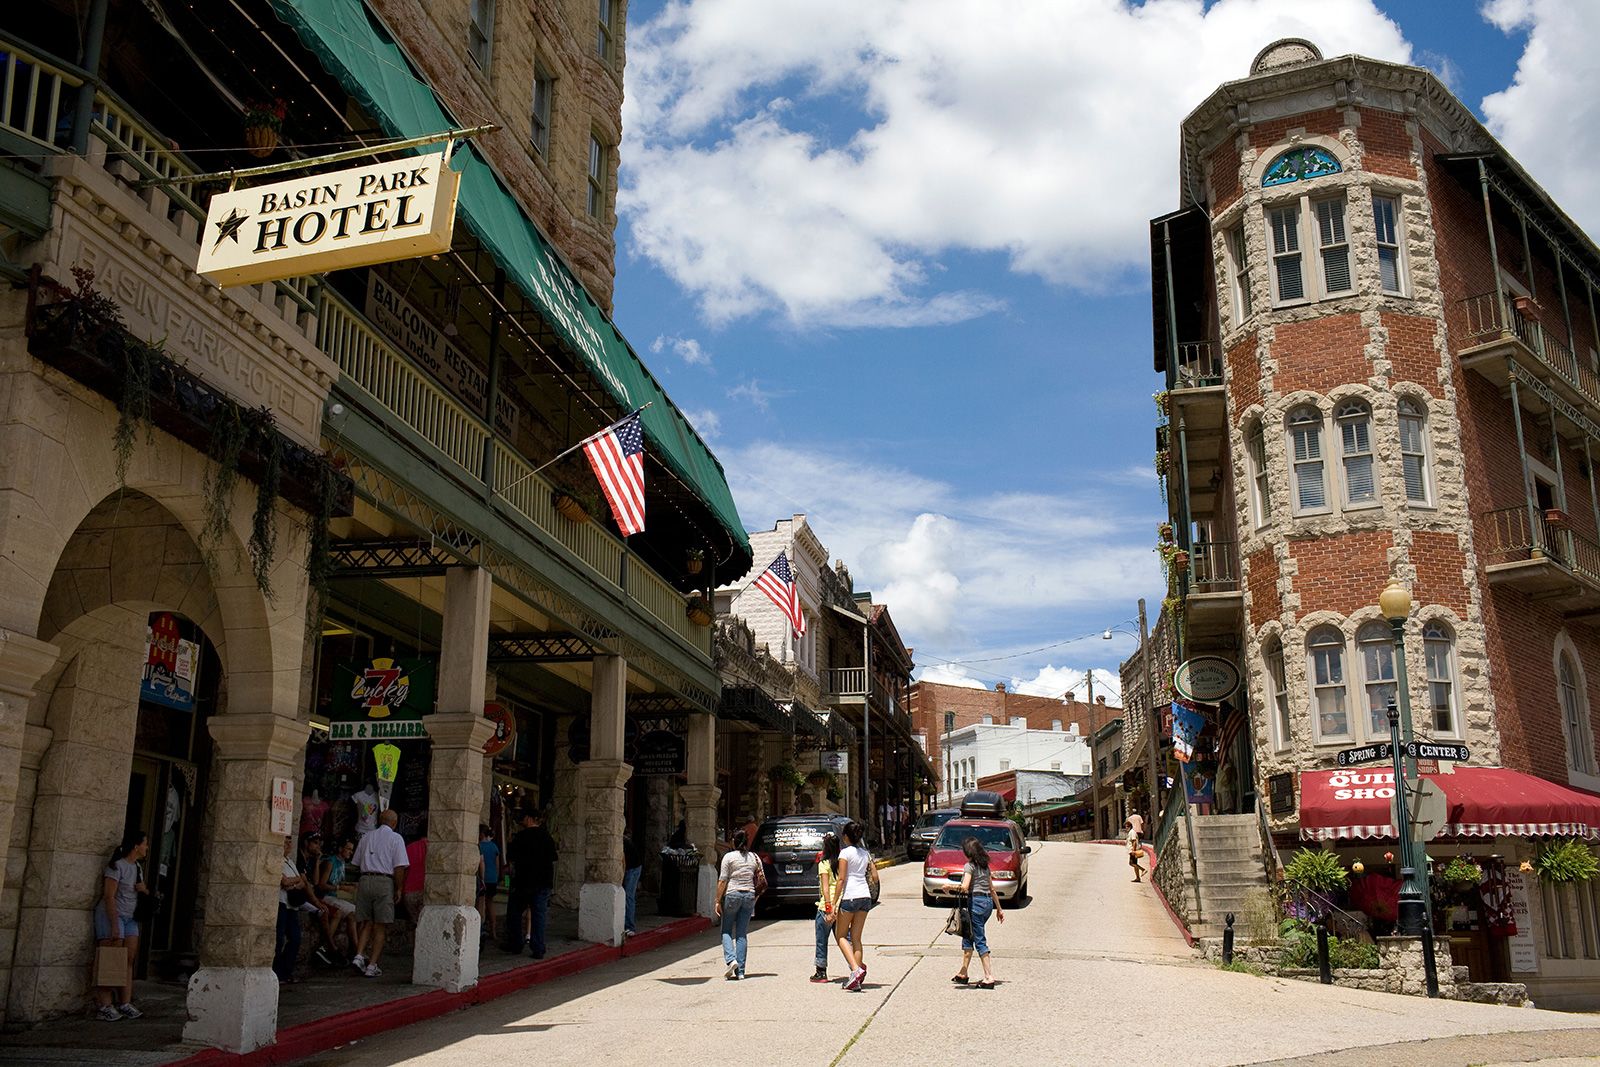 10 of the best small towns in the US: readers' travel tips